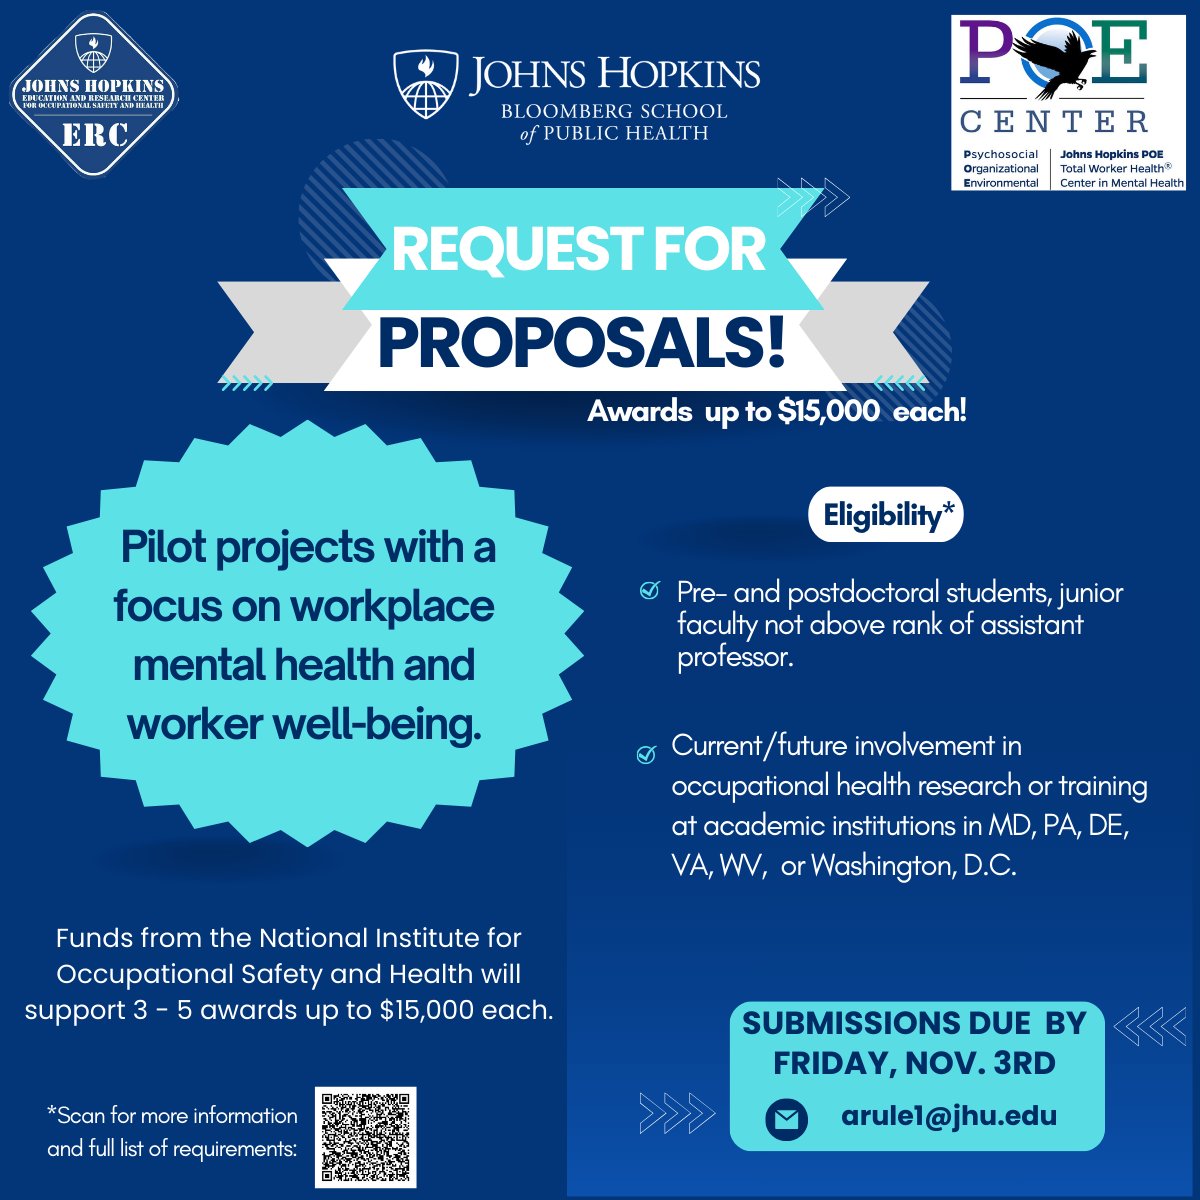 We are now accepting proposals for projects on workplace mental health and worker well-being. Training awards up to $15,000 each will be granted! Proposals are due Nov. 3rd. For more information, please visit: publichealth.jhu.edu/johns-hopkins-… @JHUERC @JohnsHopkinsSPH